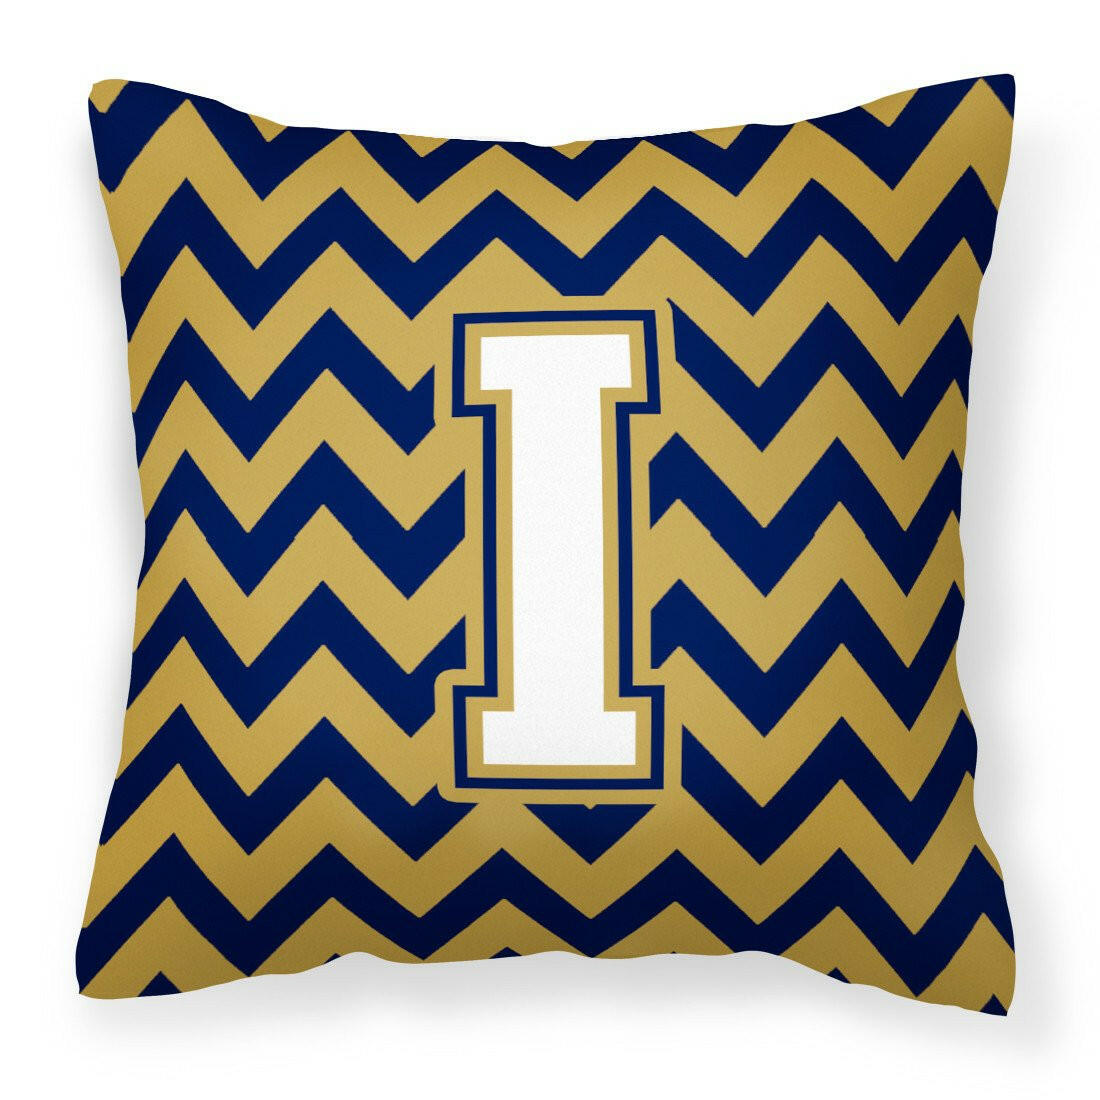 Letter I Chevron Navy Blue and Gold Fabric Decorative Pillow CJ1057-IPW1414 by Caroline's Treasures